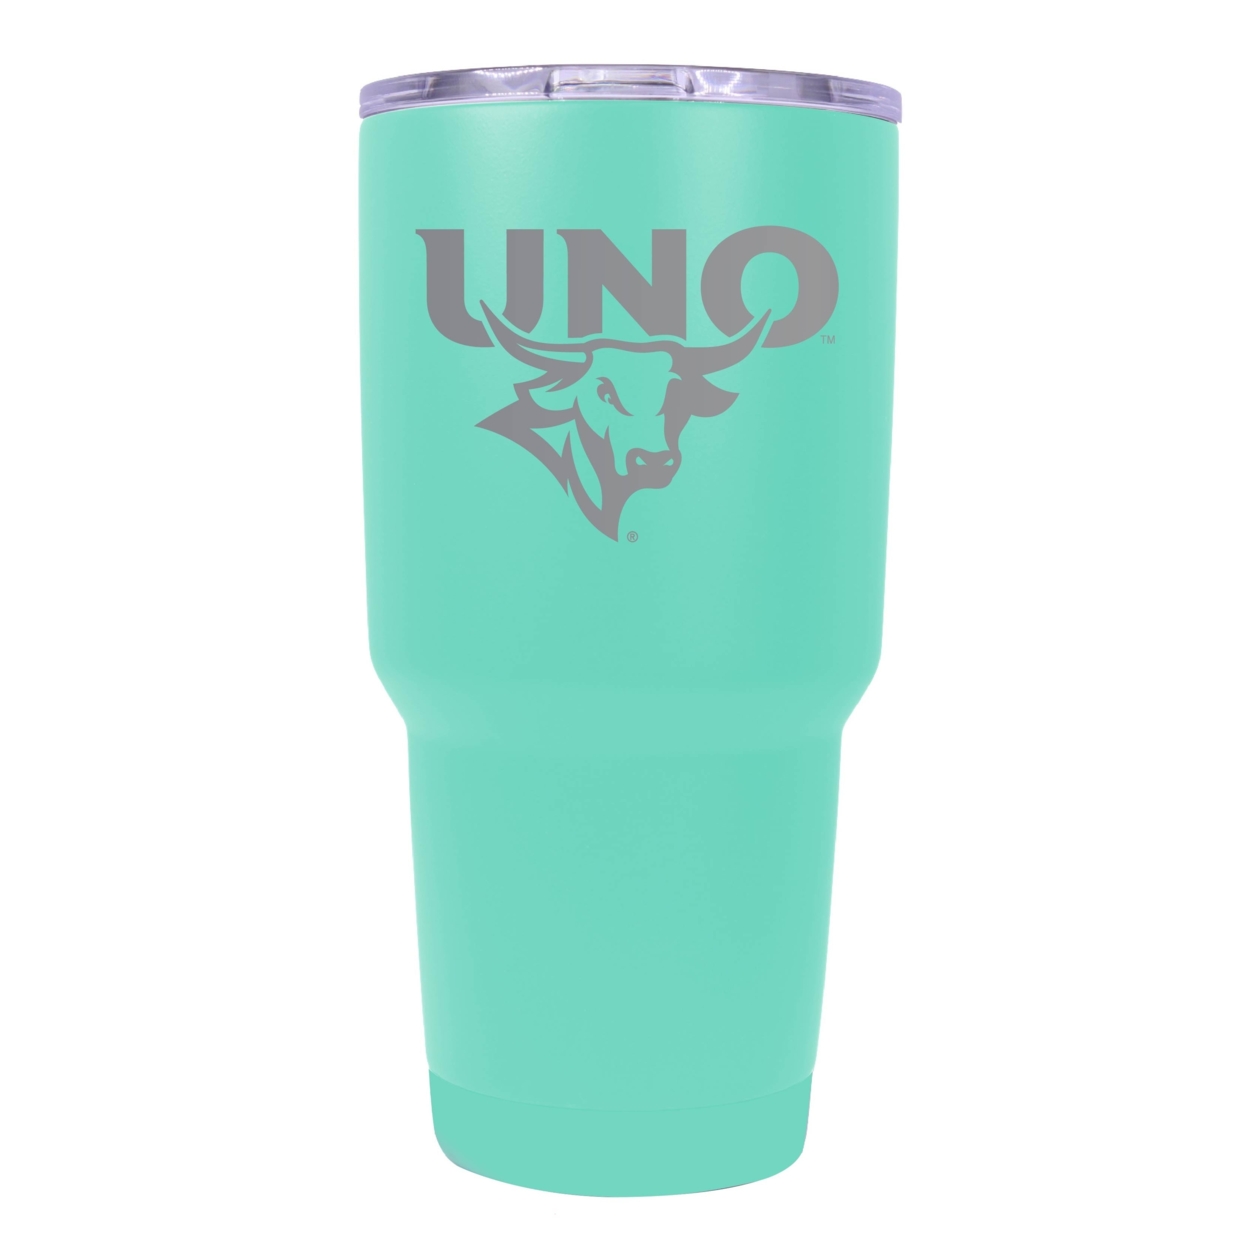 Nebraska At Omaha 24 Oz Laser Engraved Stainless Steel Insulated Tumbler - Choose Your Color. - Seafoam